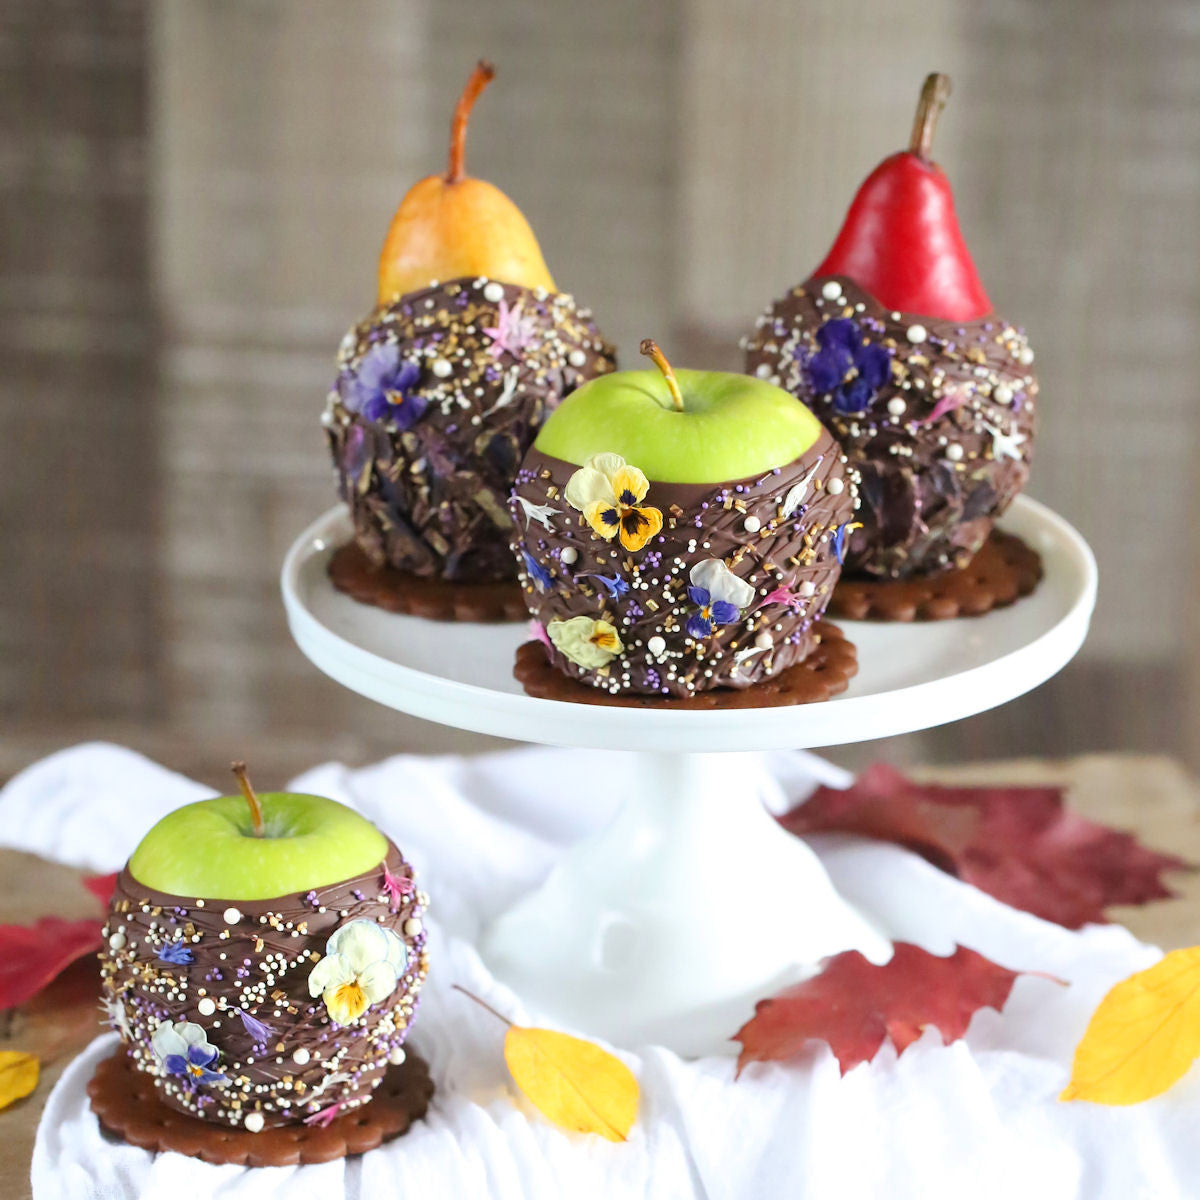 Elegant Chocolate Covered Apples and Pears